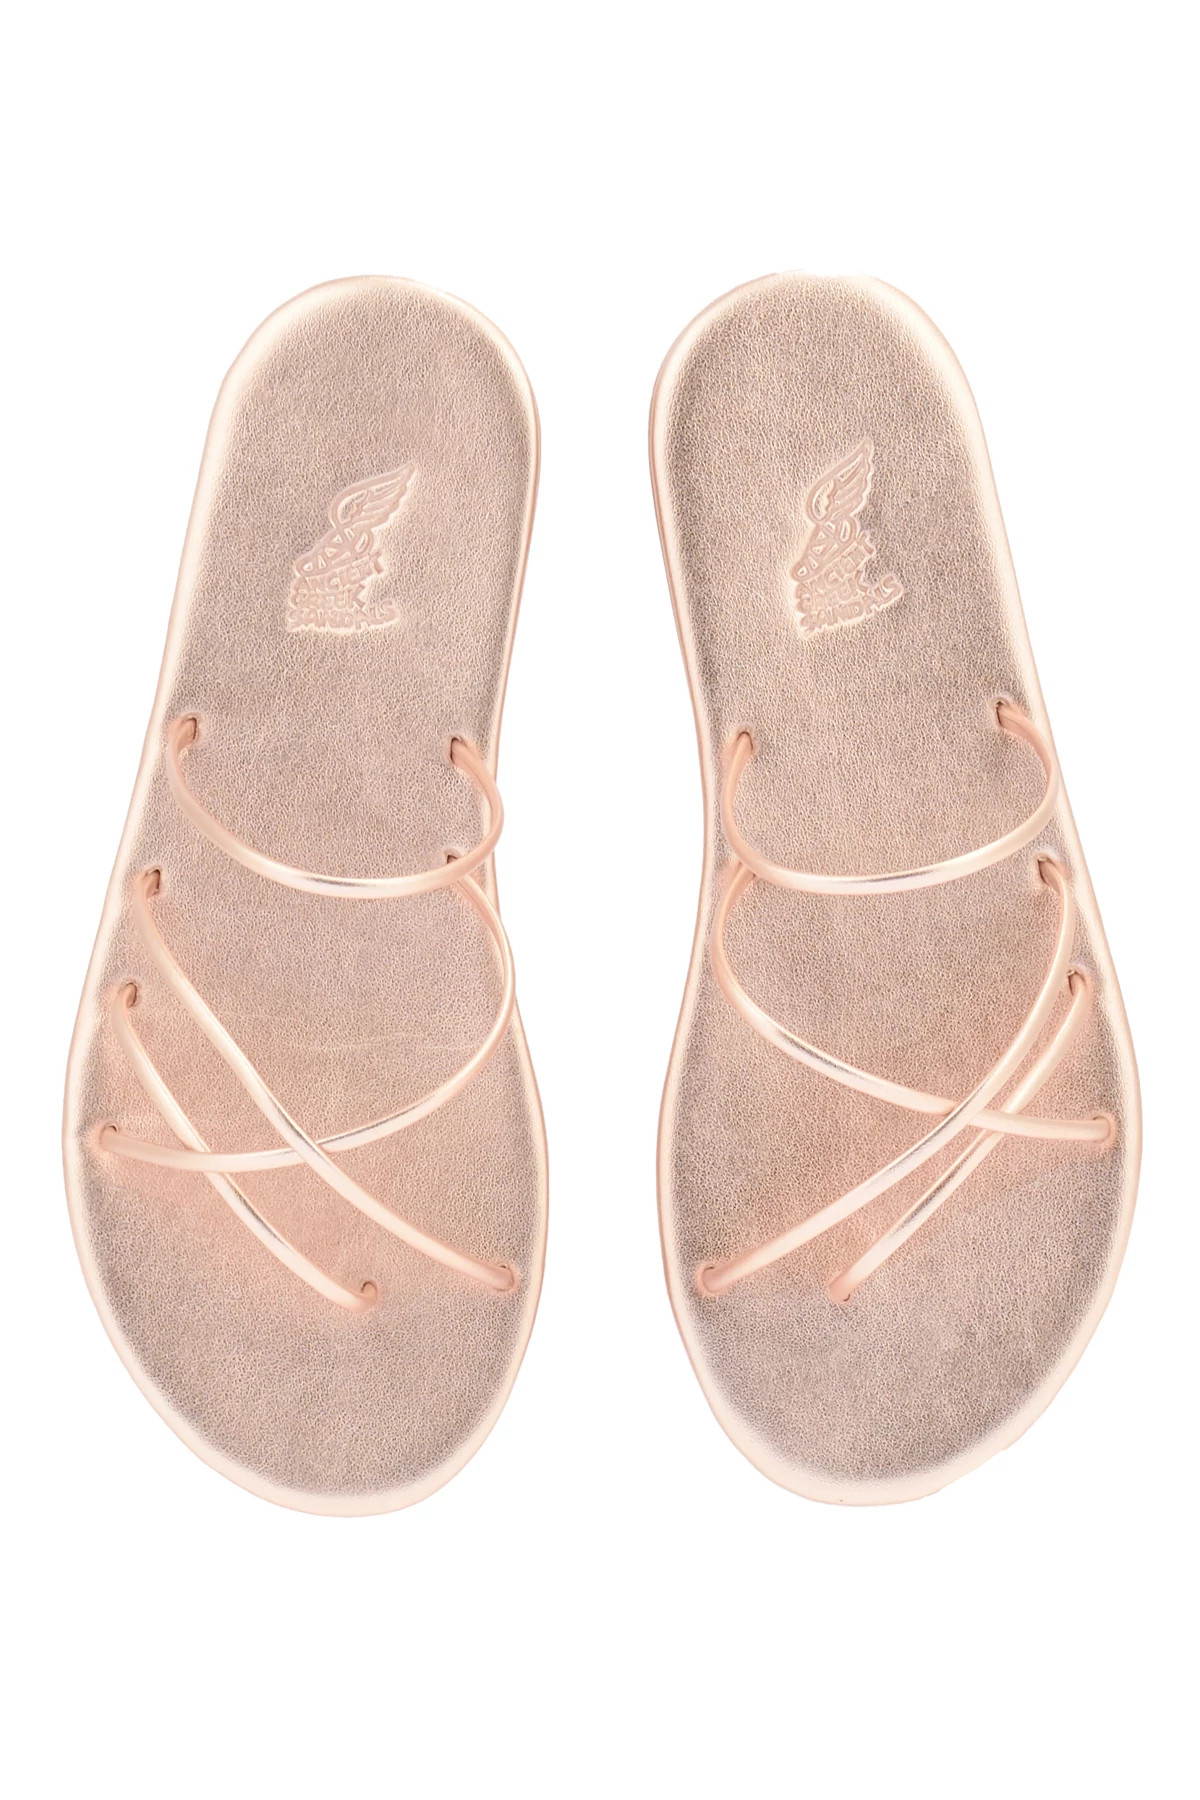 ROSE GOLD Pu Metallic Strappy Sandals image number 1